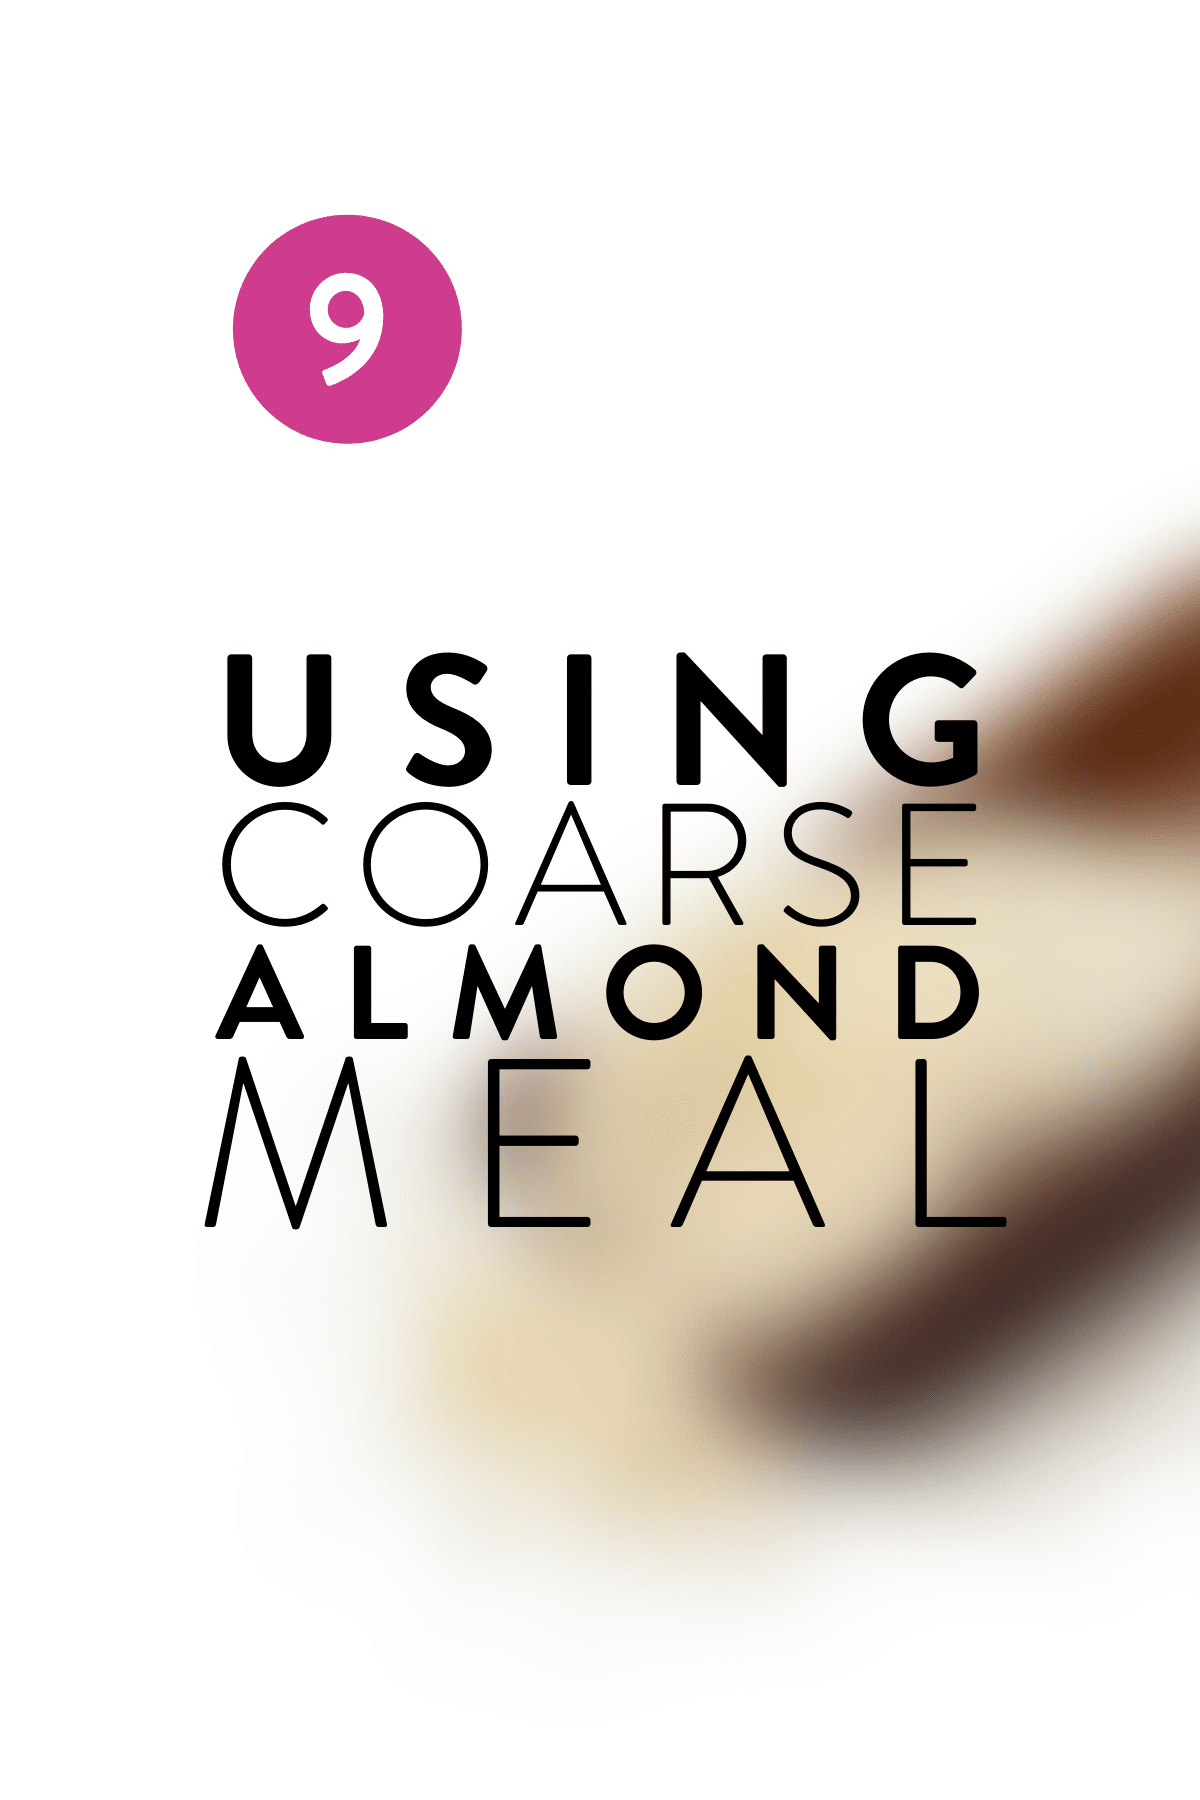 Mistake 9 - Using Coarse Almond Meal